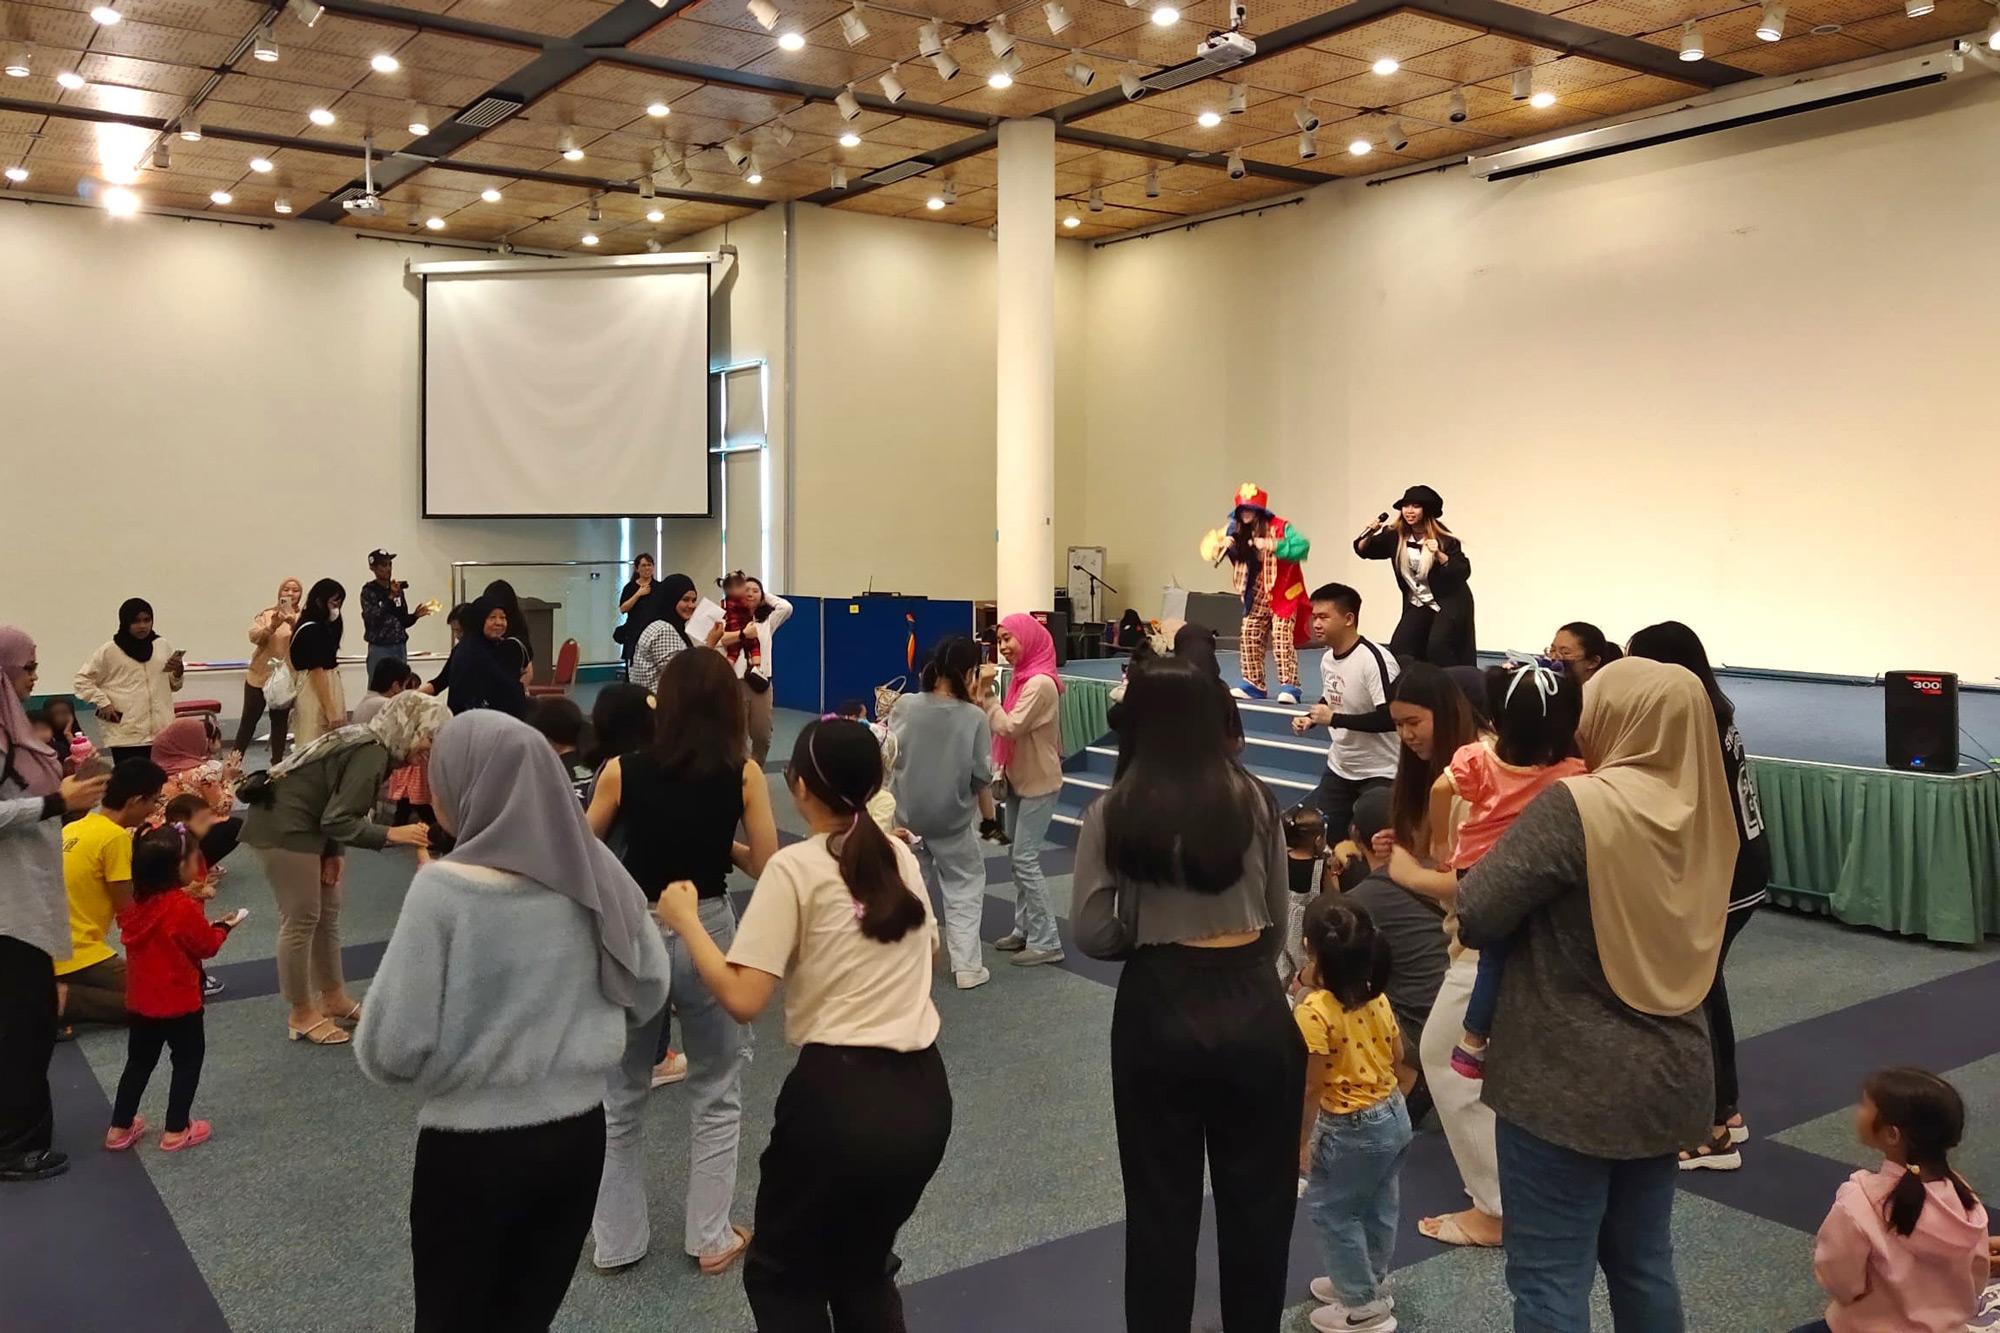 The children and parents perform the Chicken Dance during the music and movement session.